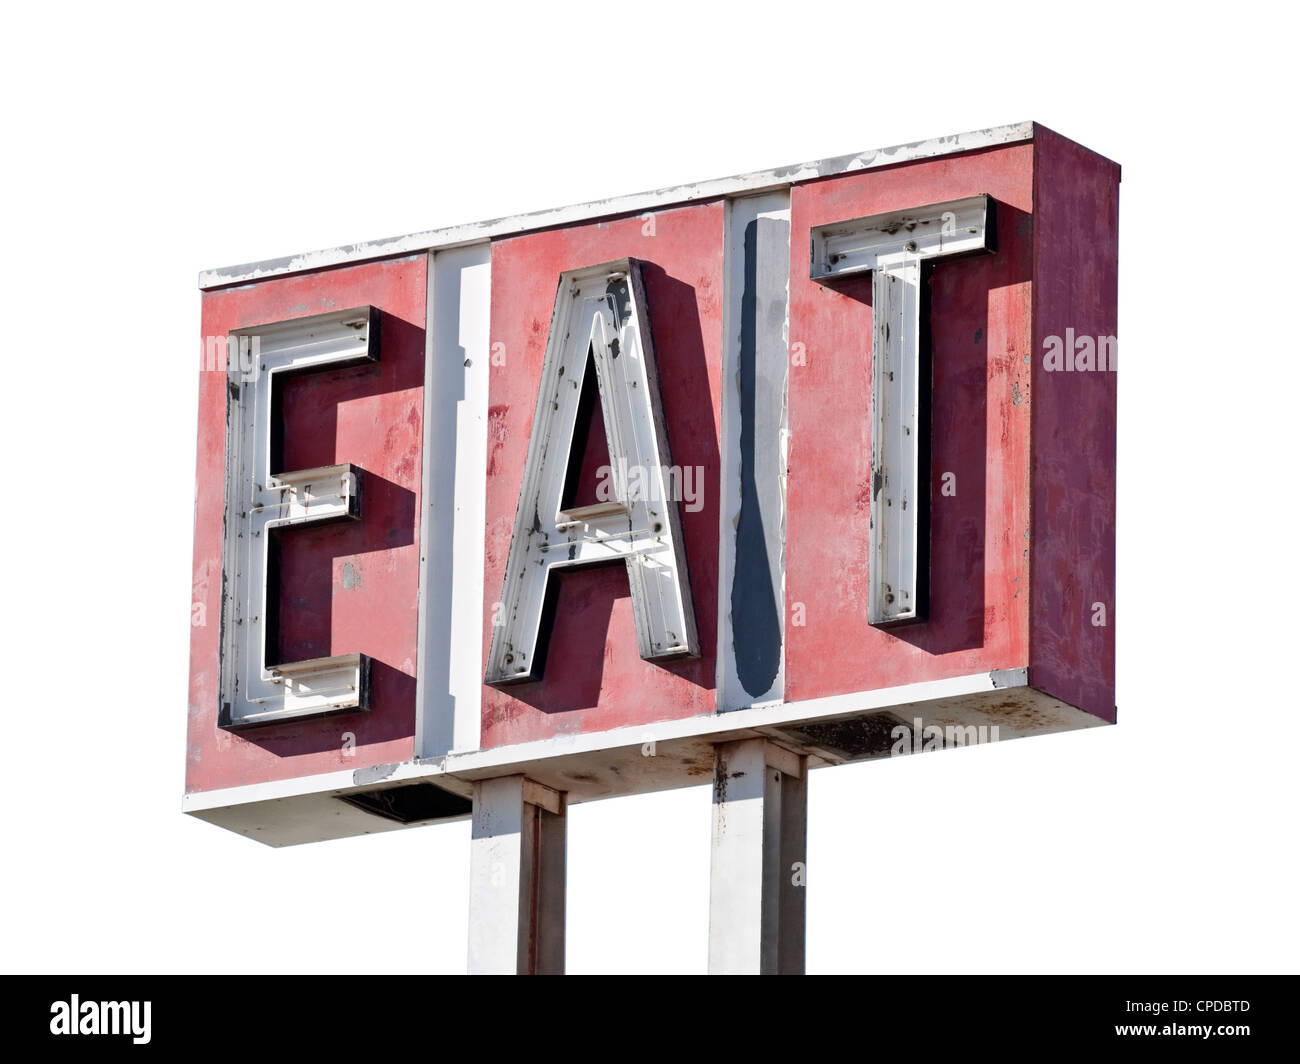 Vintage decayed neon eat sign isolated. Stock Photo